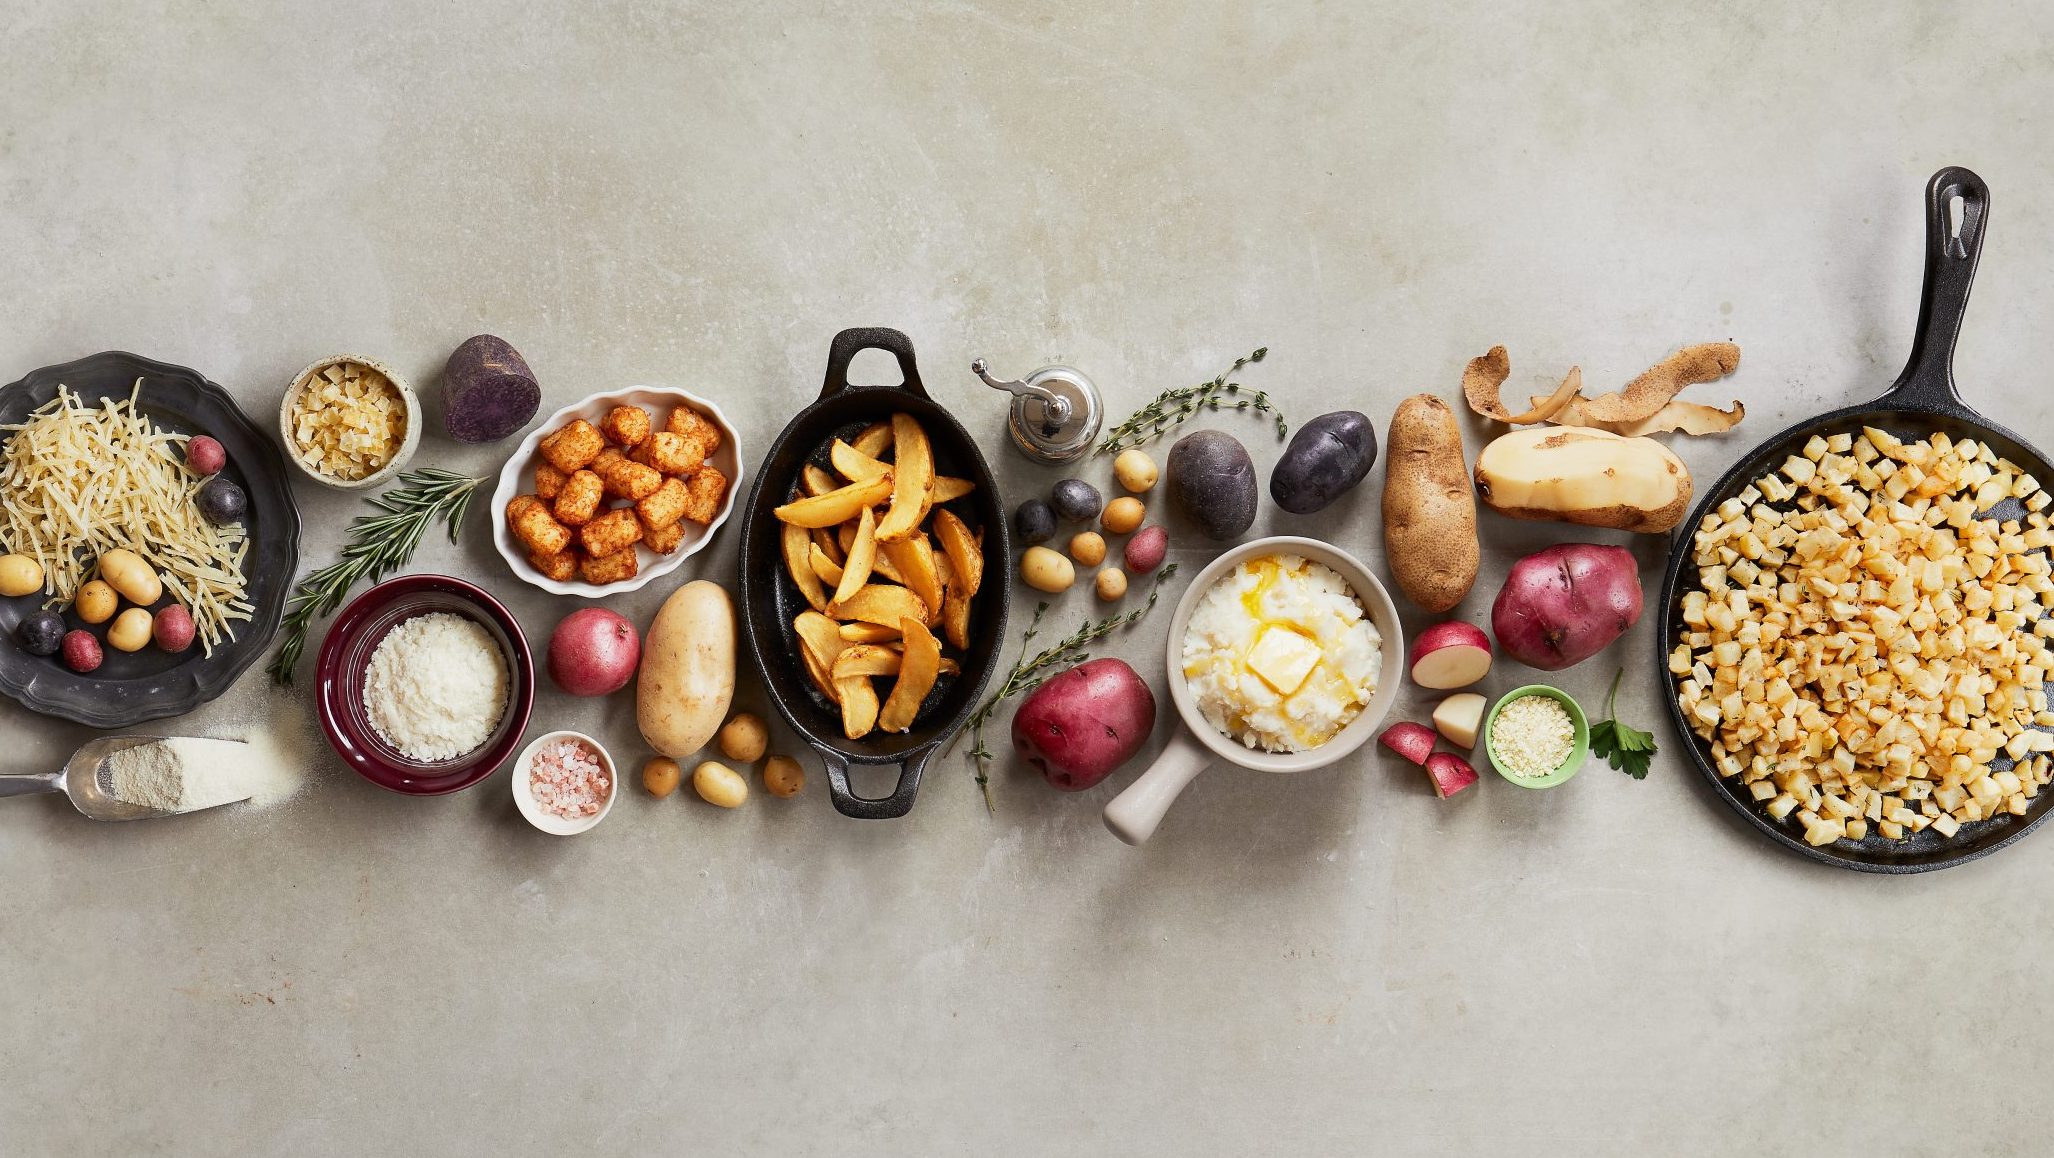 Potatoes 101: Nutrition Facts, Health Benefits, and Types